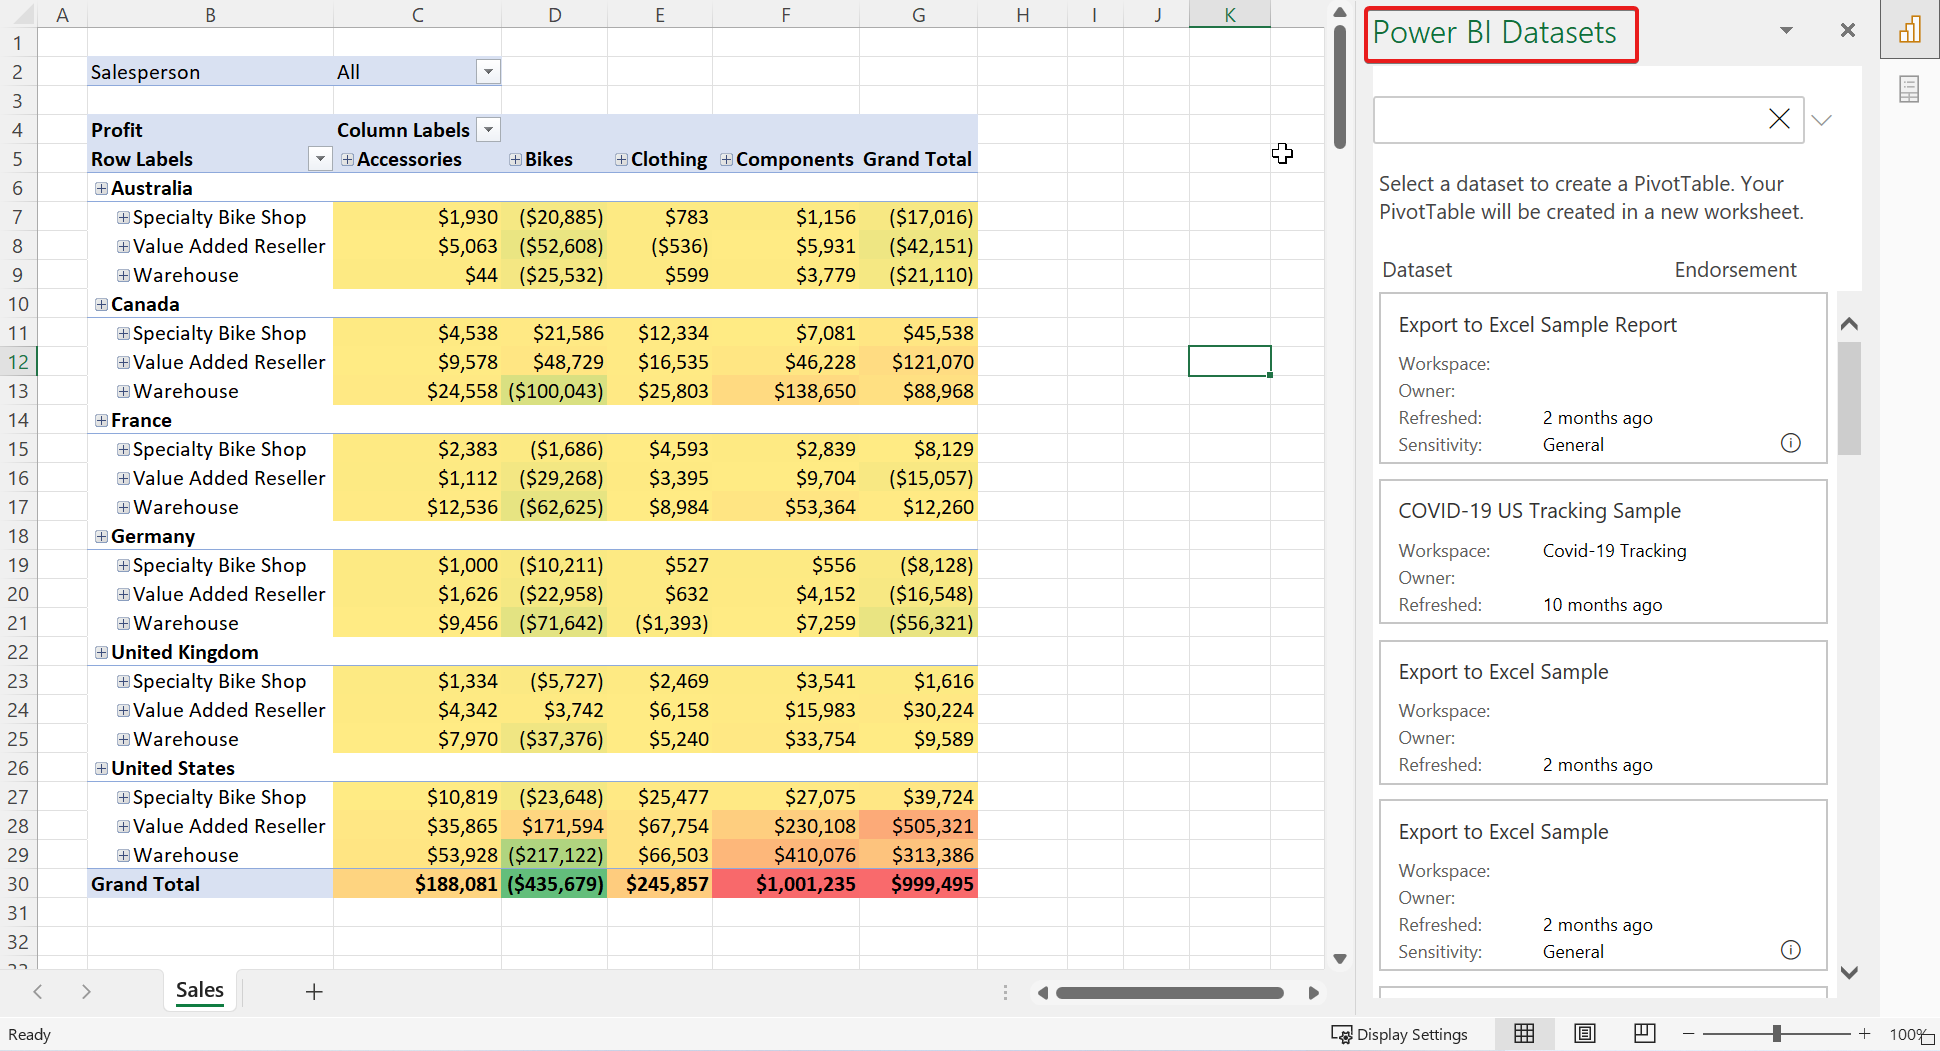 Screenshot of PivotTable and Power BI datasets in Excel.